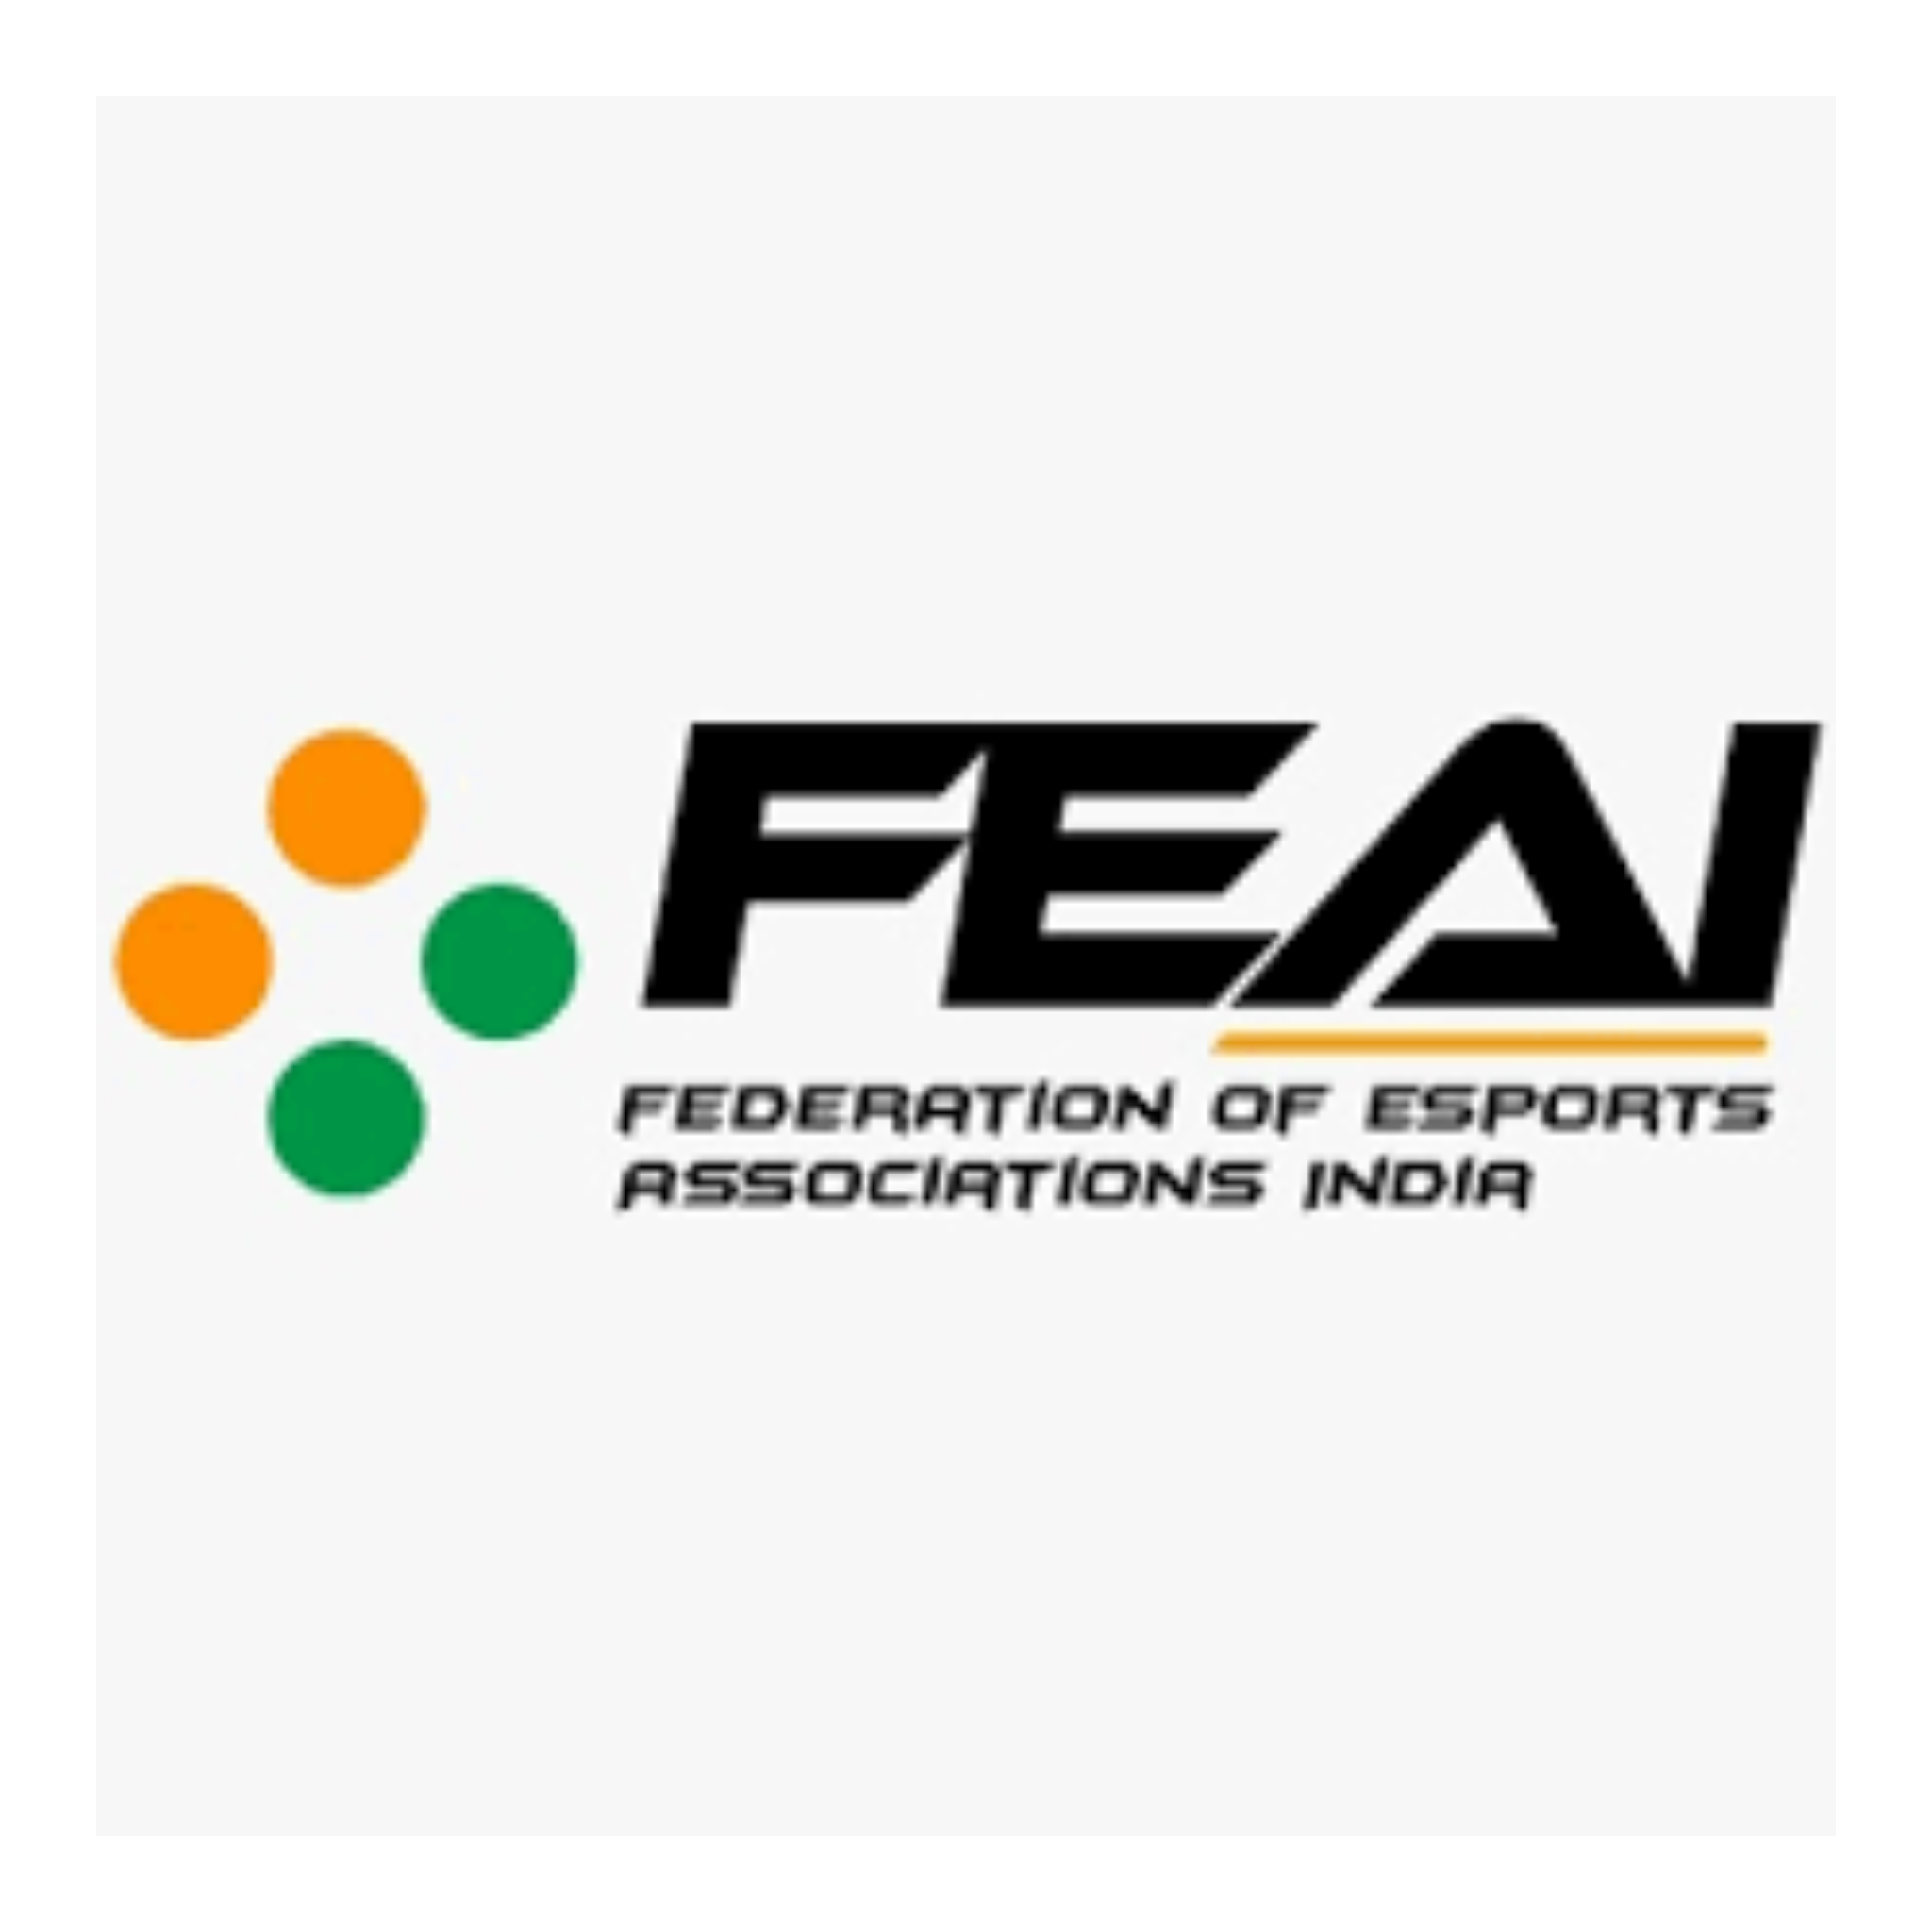 Federation of Electronic Sports Associations India (FEAI) celebrates  Hon’ble PM Shri Narendra Modi’s clarion call to “Create in India” taking “Brand India” to the world.-thumnail